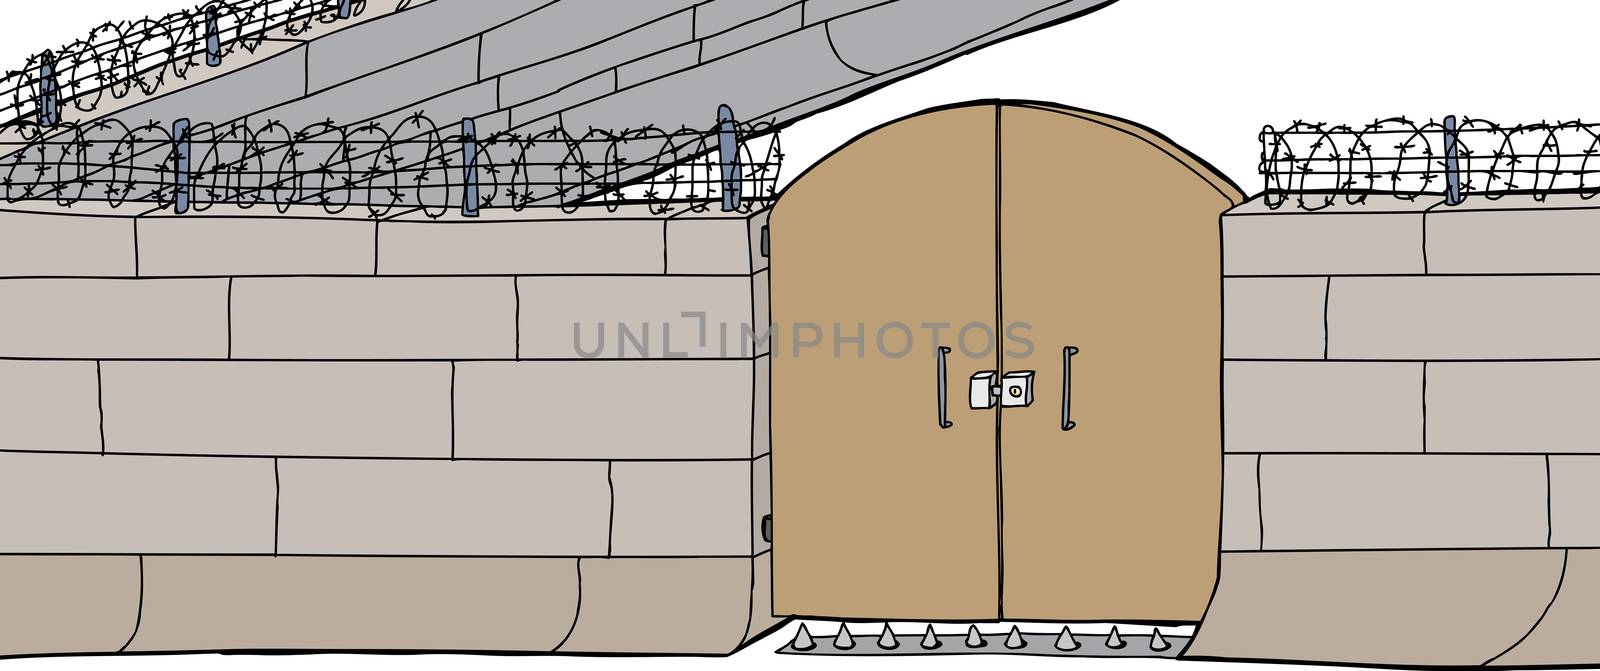 Large doors on prison wall with barbed wire